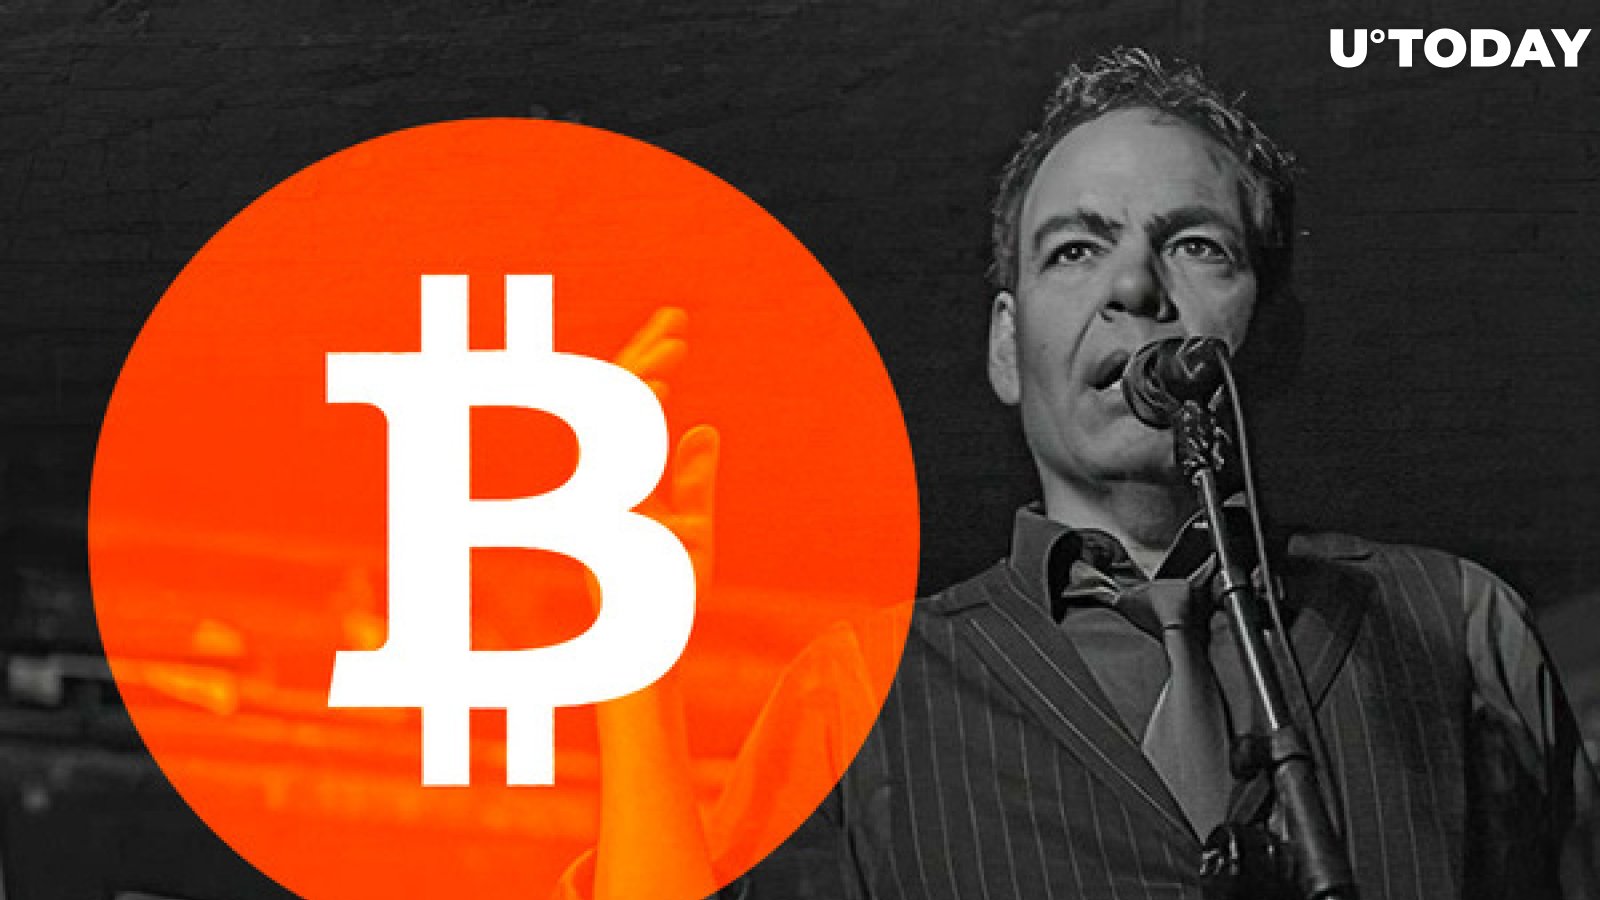 Max Kaiser Expects Bitcoin to Hit $220,000 in 2021 as Fiat Money Hyperinflation Collapse Continues